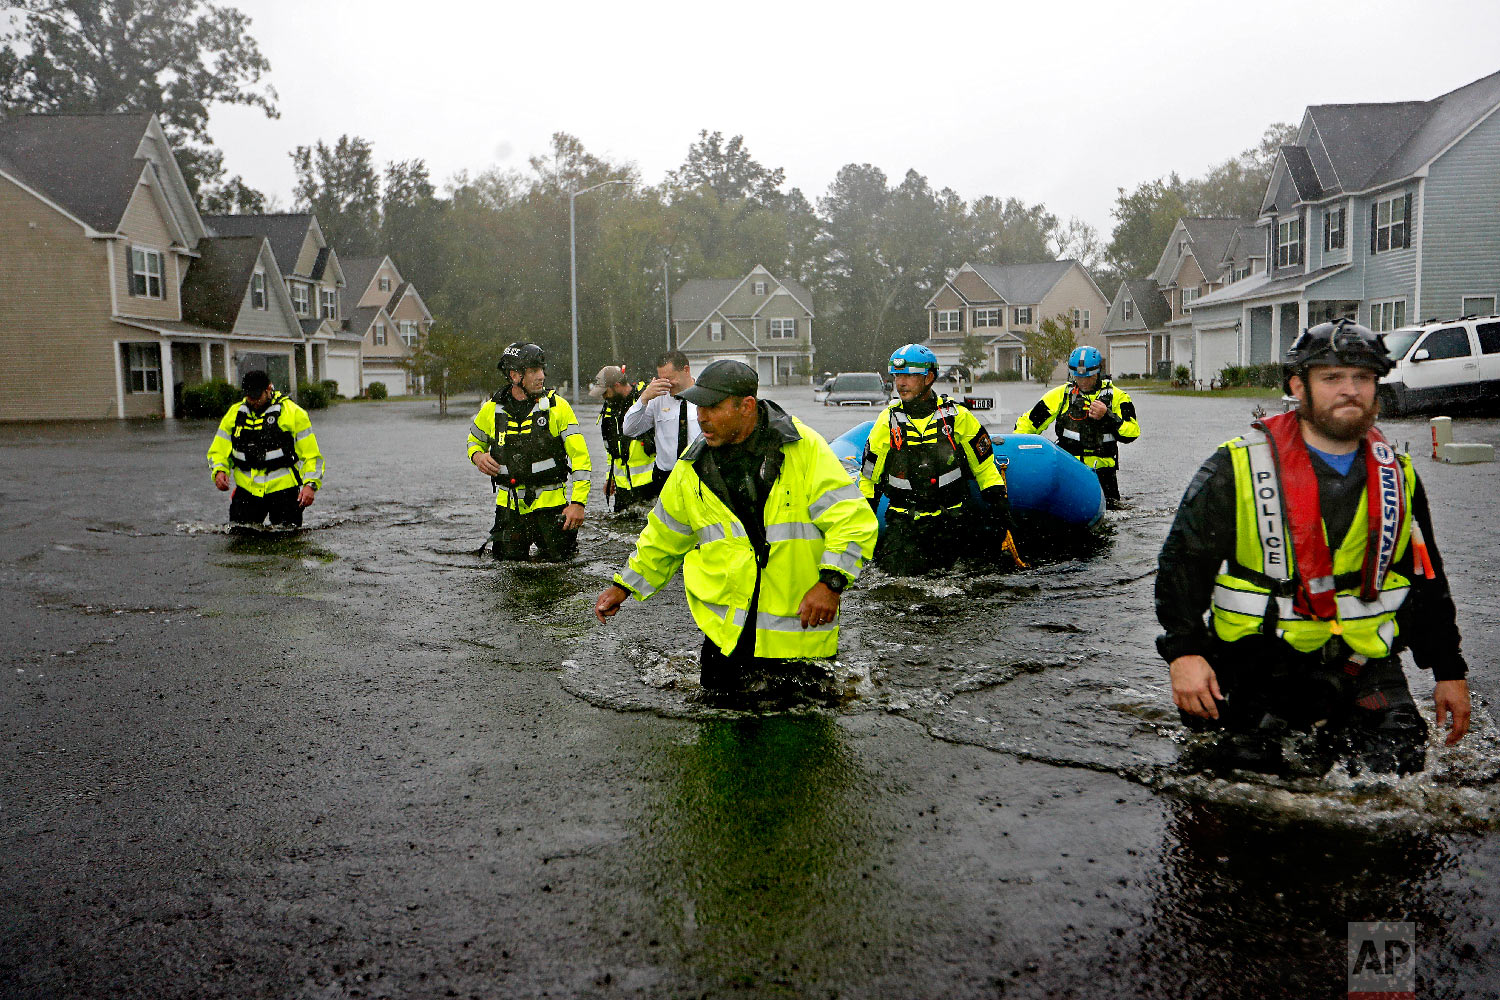  Members of the North Carolina Task Force urban search and rescue team wade through a flooded neighborhood looking for residents who stayed behind as Florence continues to dump heavy rain in Fayetteville, N.C., on Sept. 16, 2018. (AP Photo/David Gold